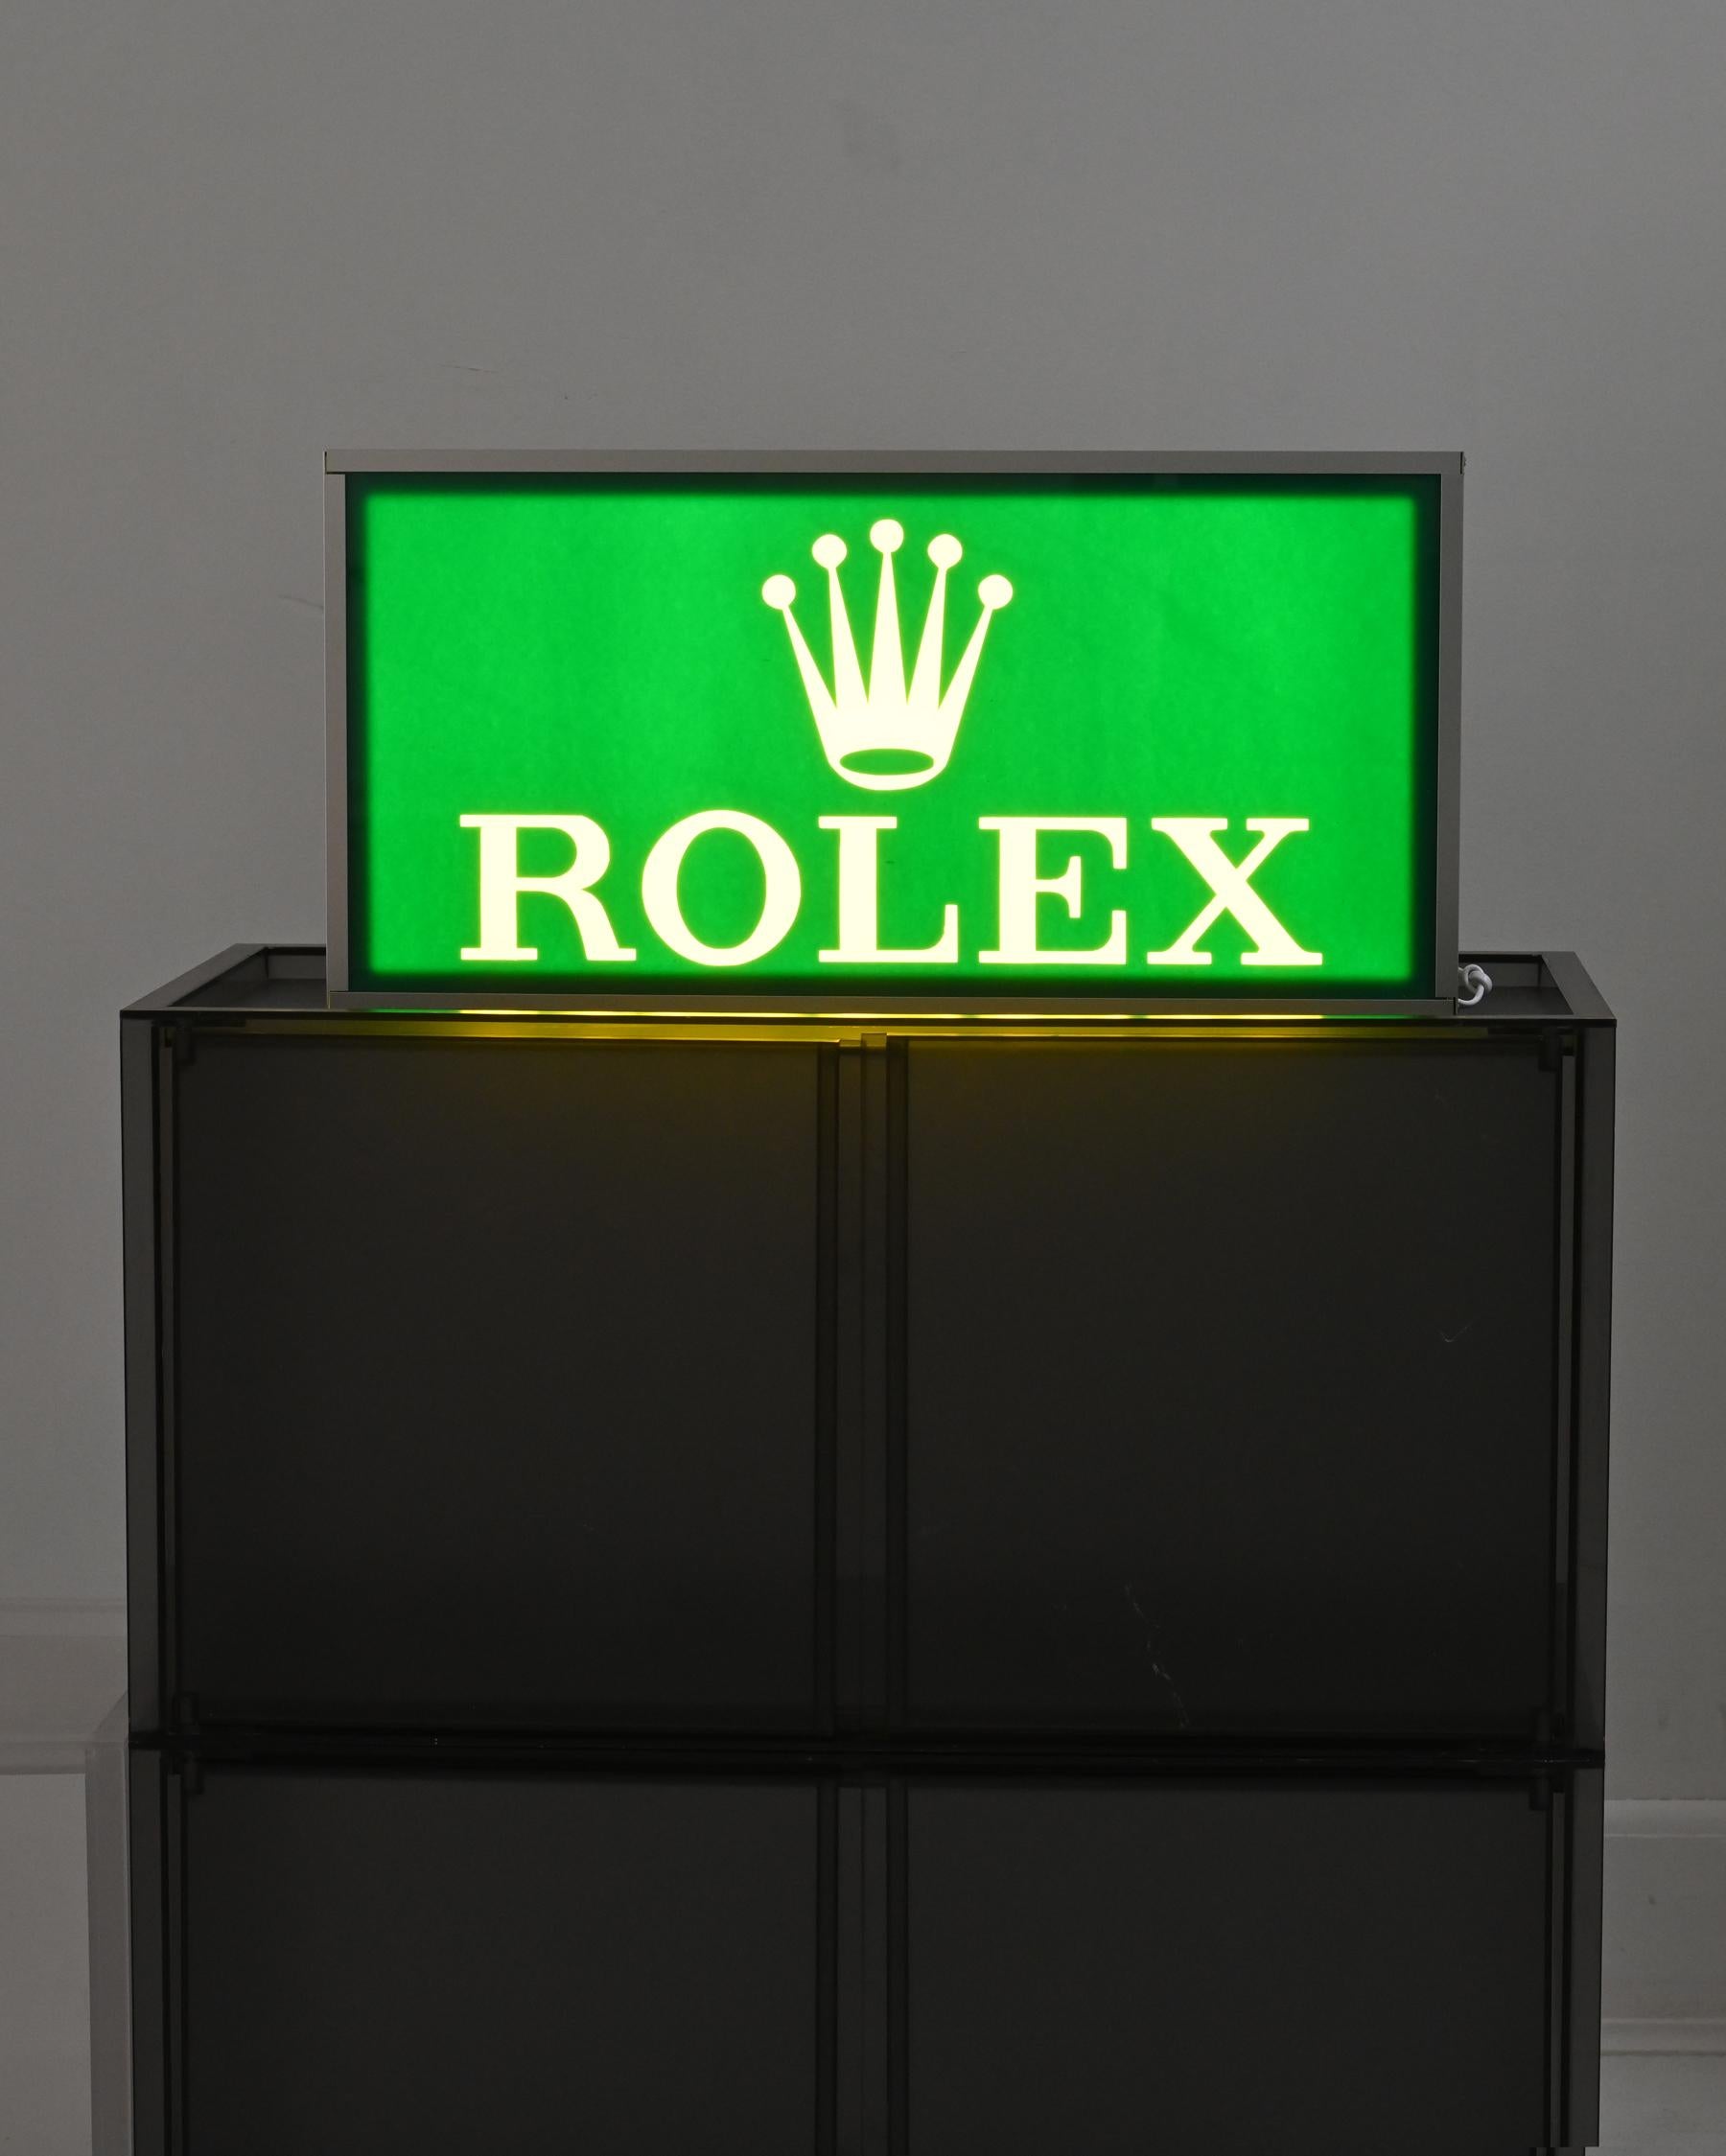 Stainless Steel 1990s ROLEX Advertising Signage with Yellow Lighting